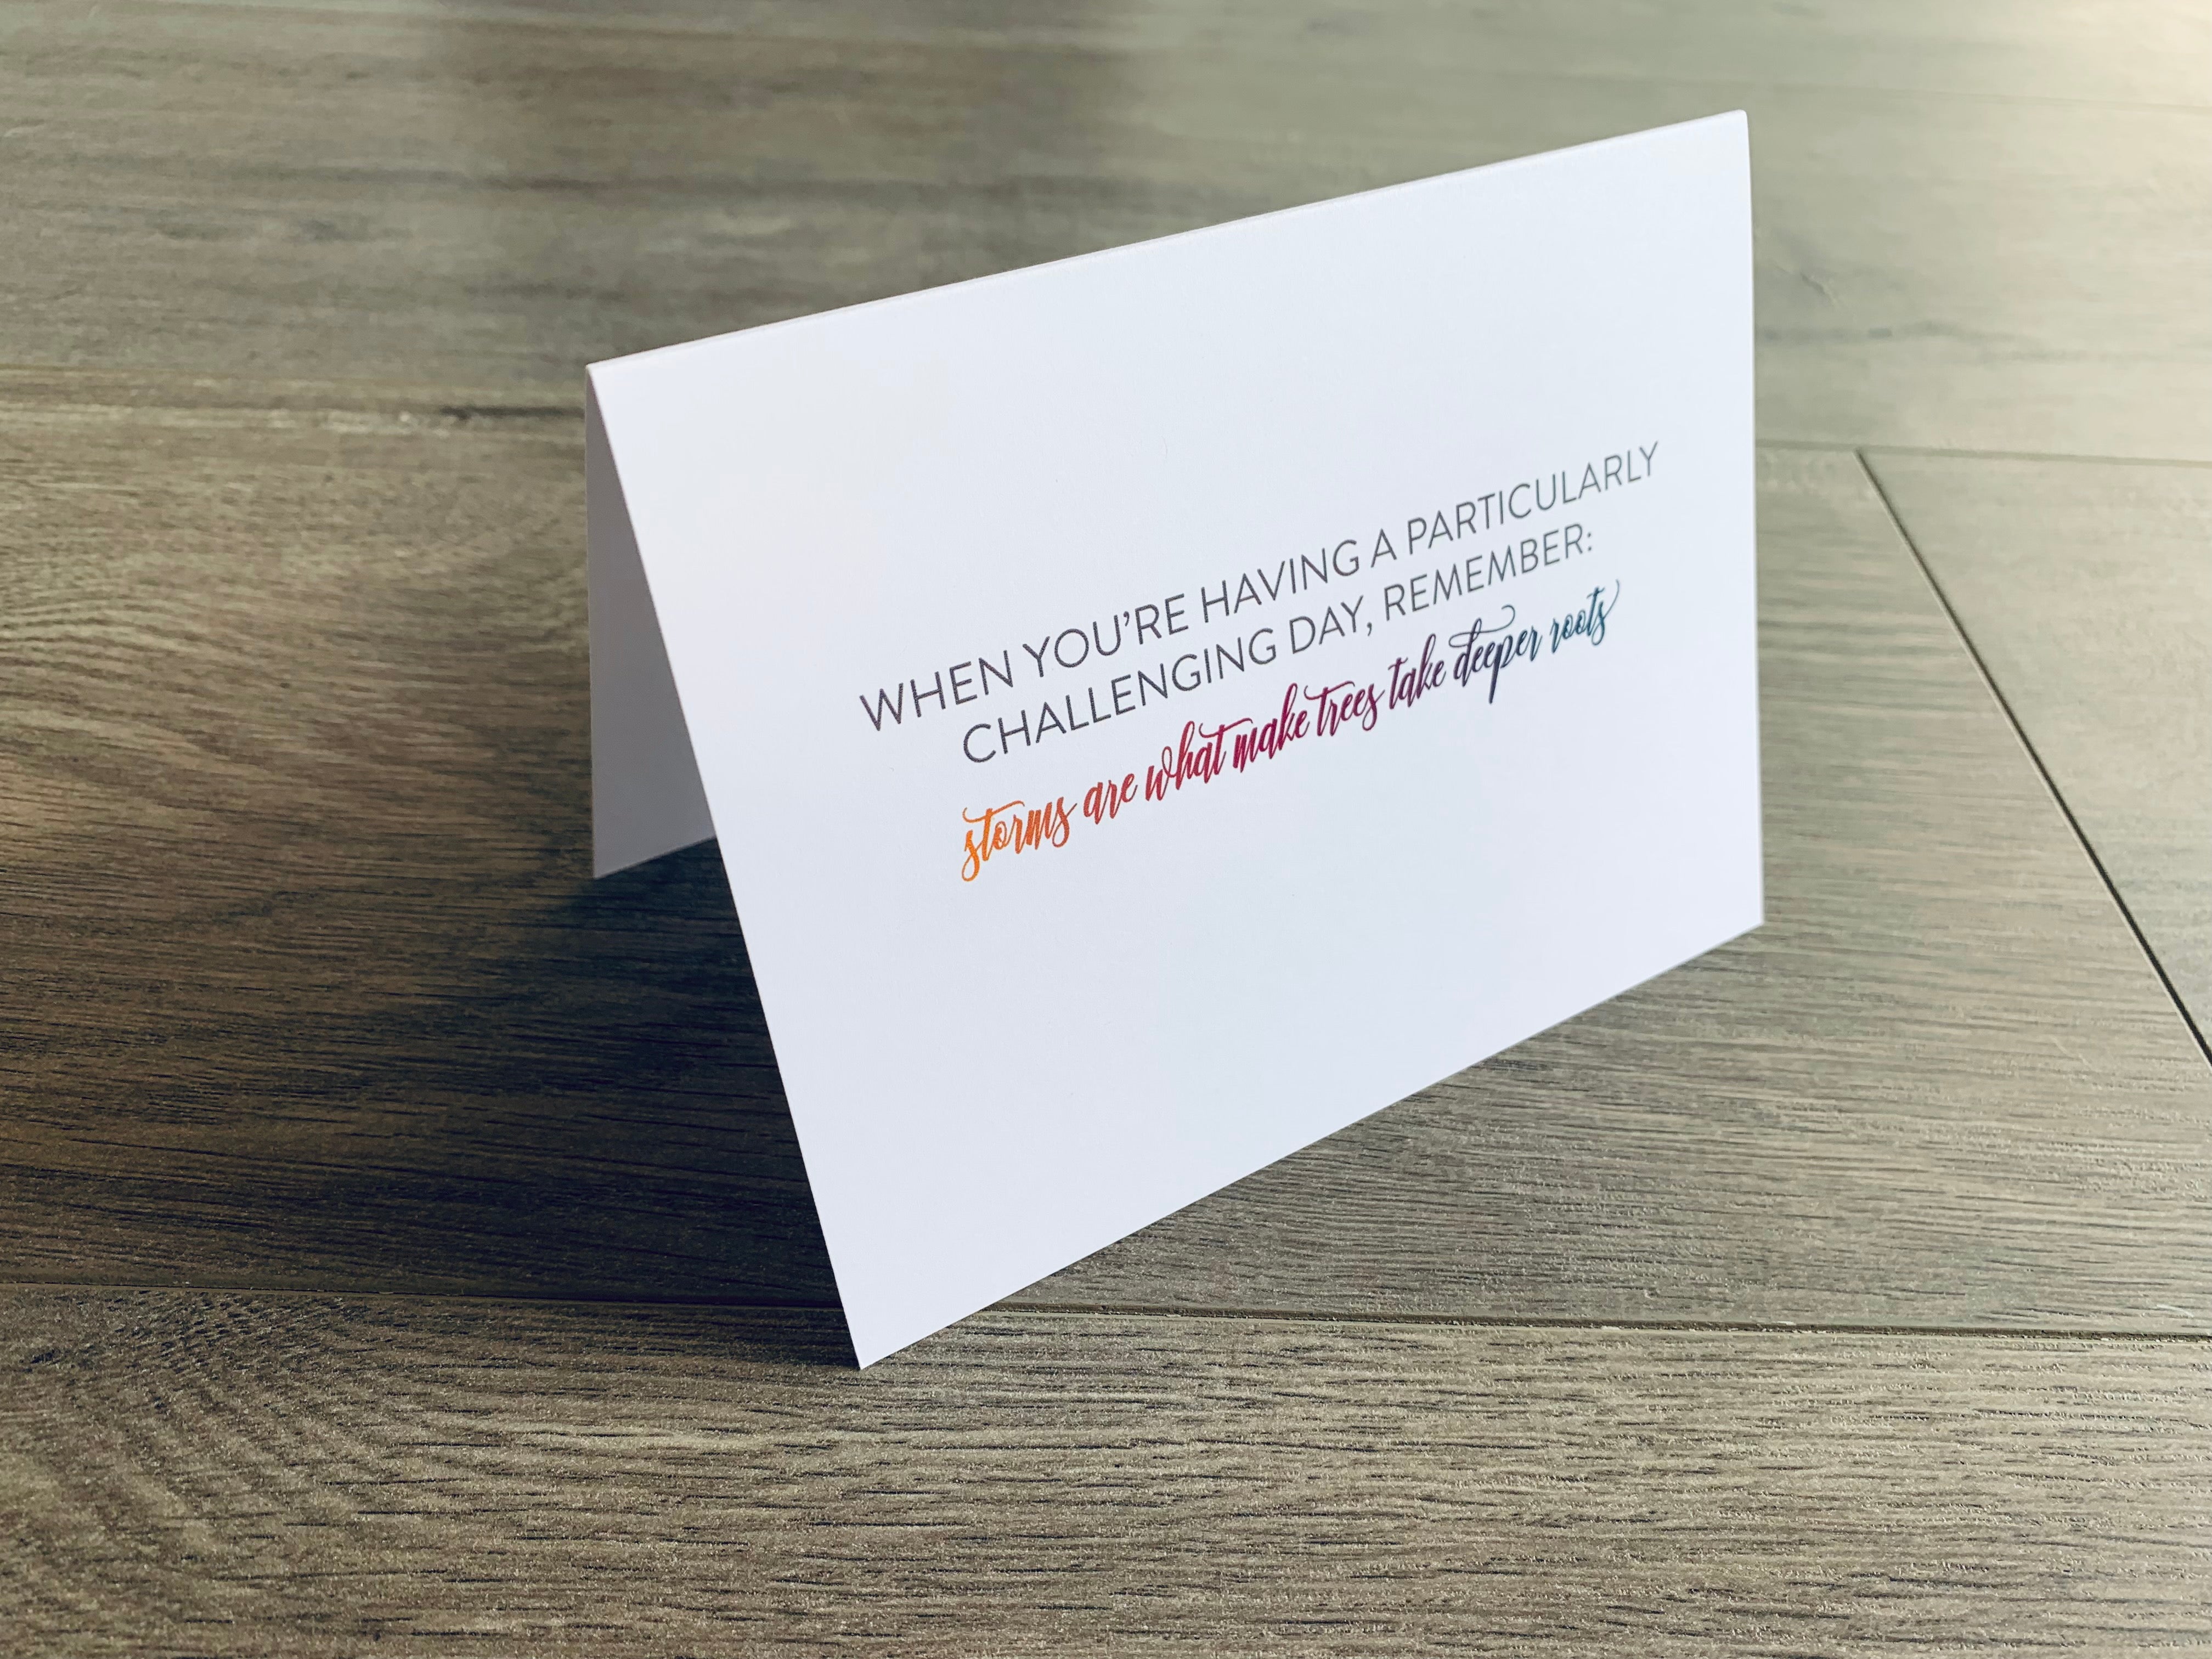 A white, folded notecard sits on a gray wooden floor. The card reads, "When you're having a particularly challenging day, remember: storms are what make trees take deeper roots." Sending Support collection by Stationare.